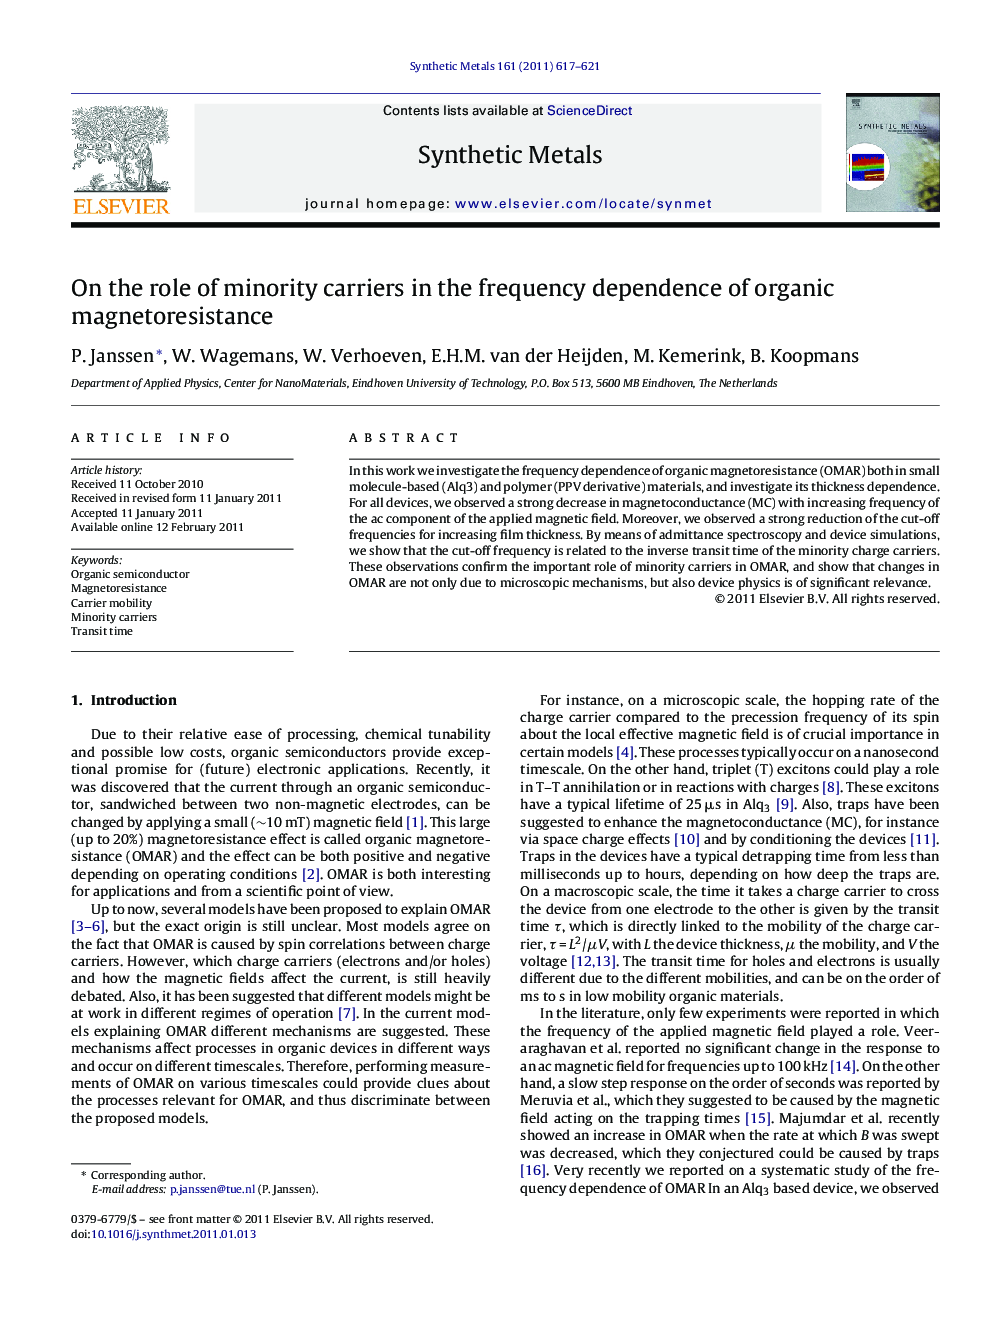 On the role of minority carriers in the frequency dependence of organic magnetoresistance